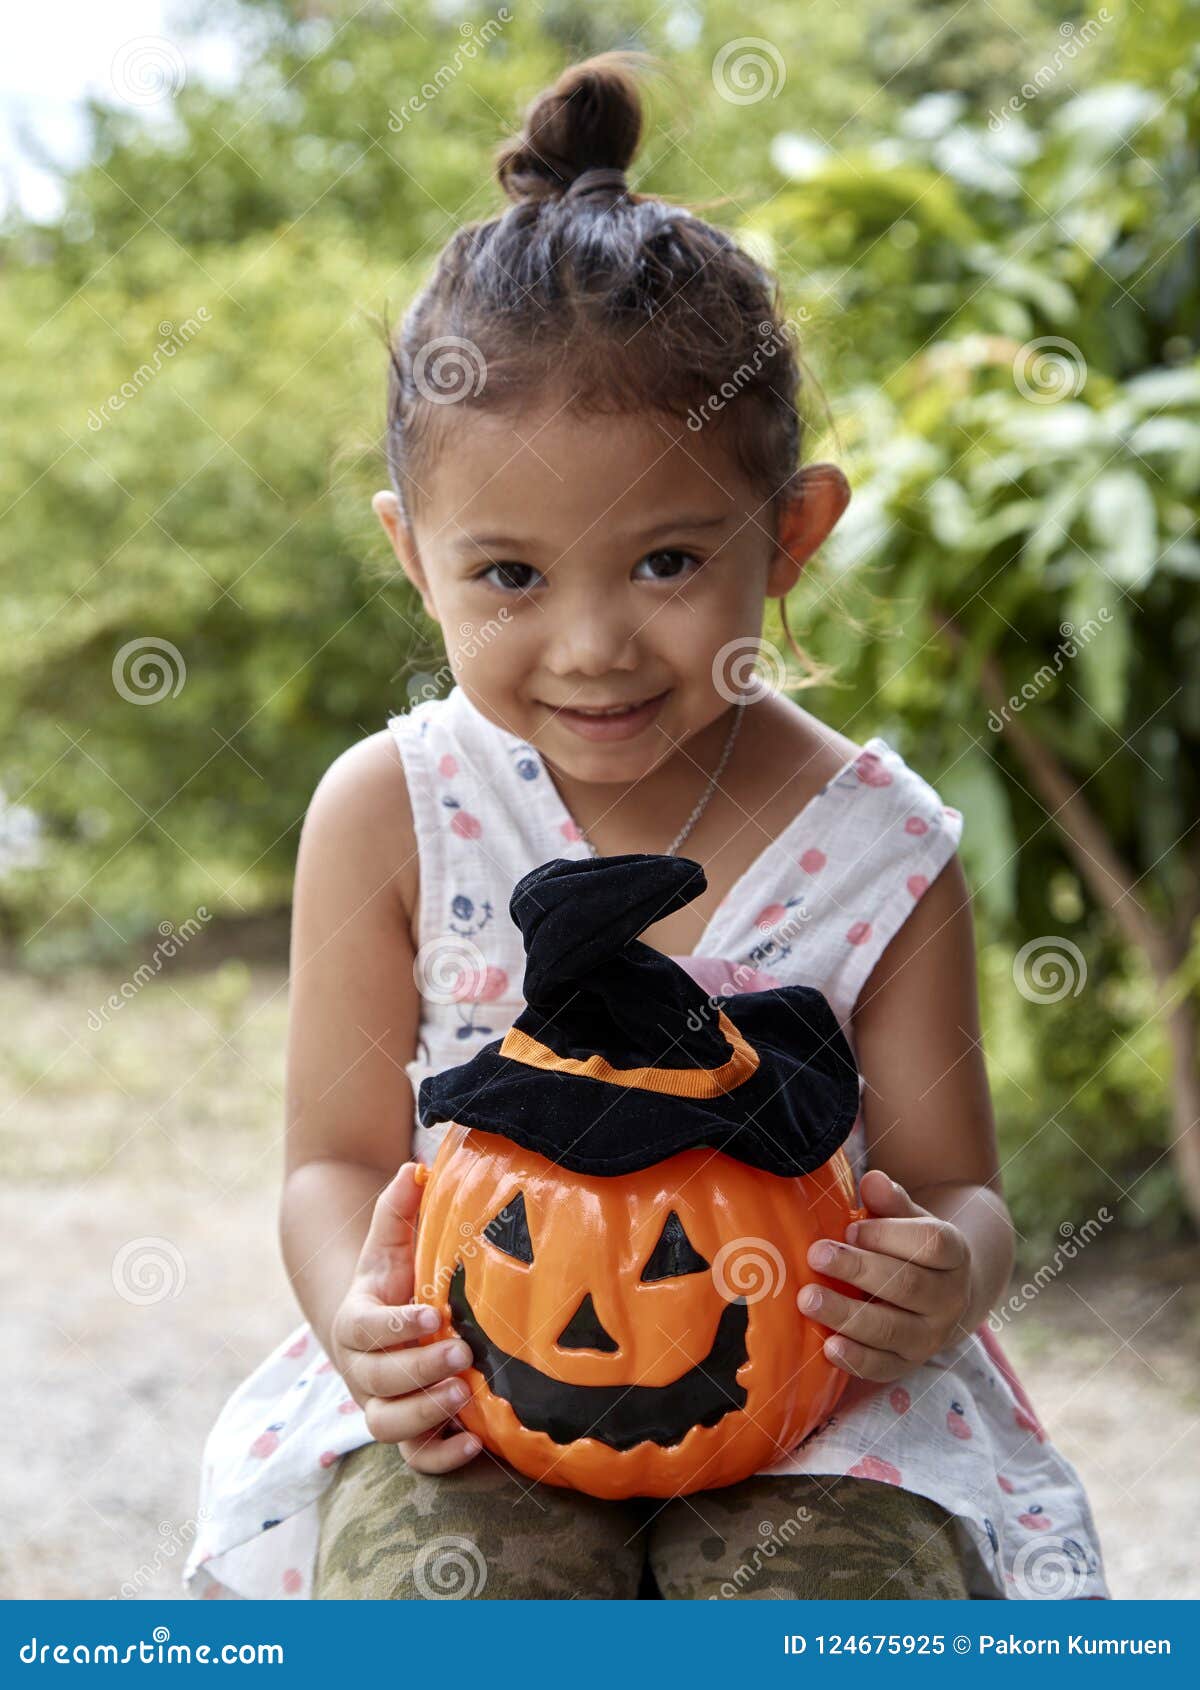 Little Girl with Halloween Pumpkin Stock Image - Image of background ...